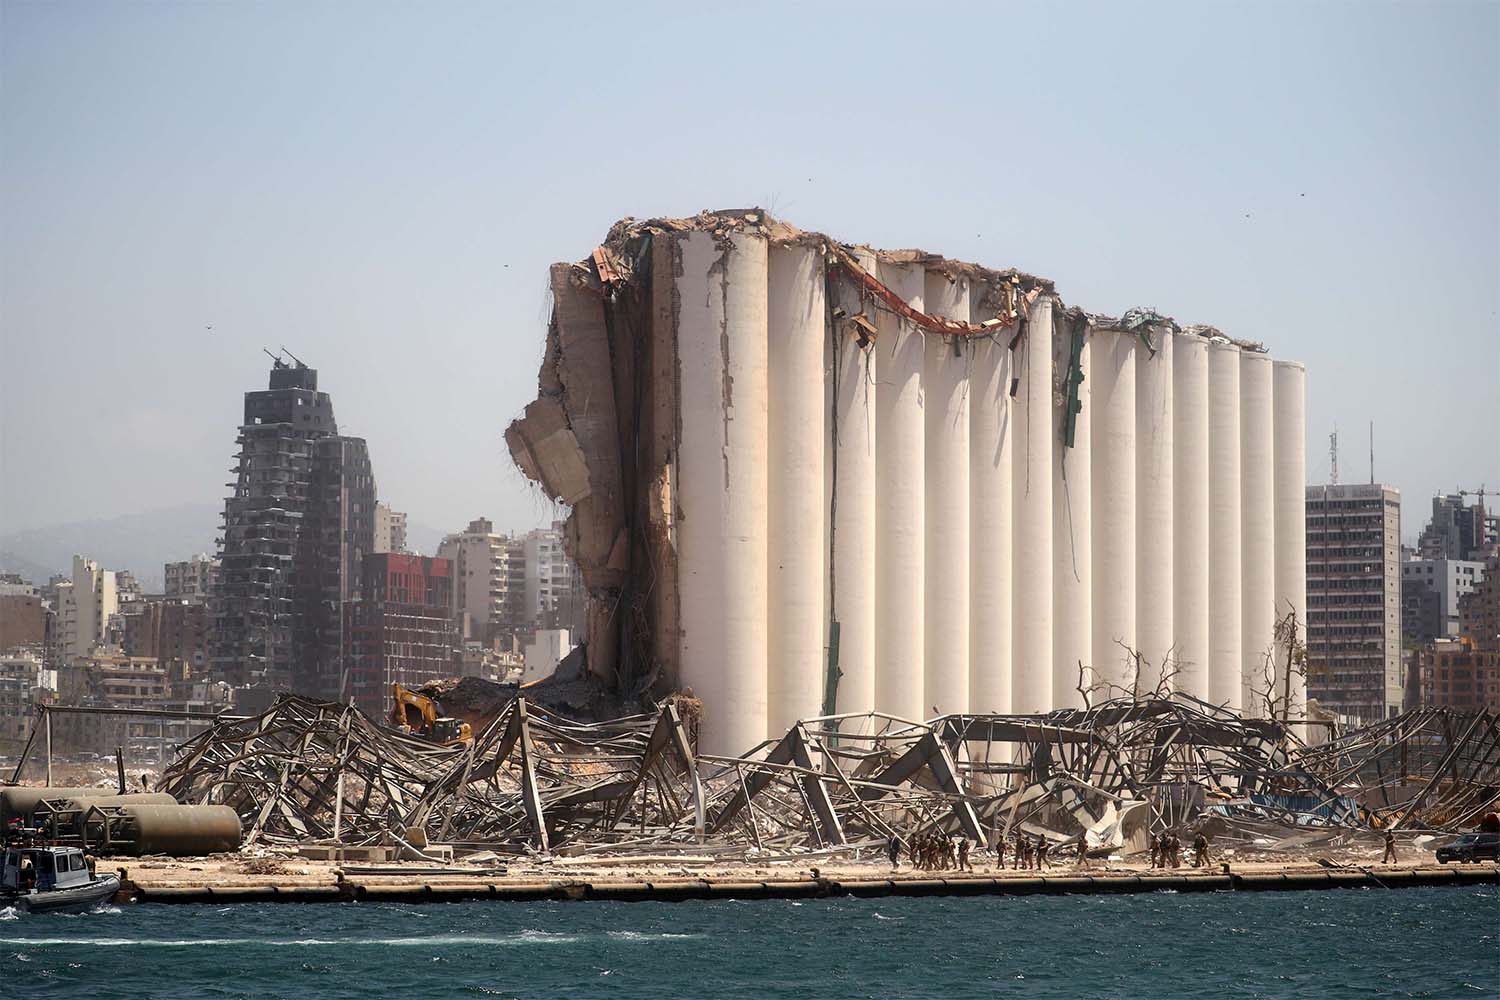 A general view shows the severely damaged grain silo following the explosion in Beirut's port area